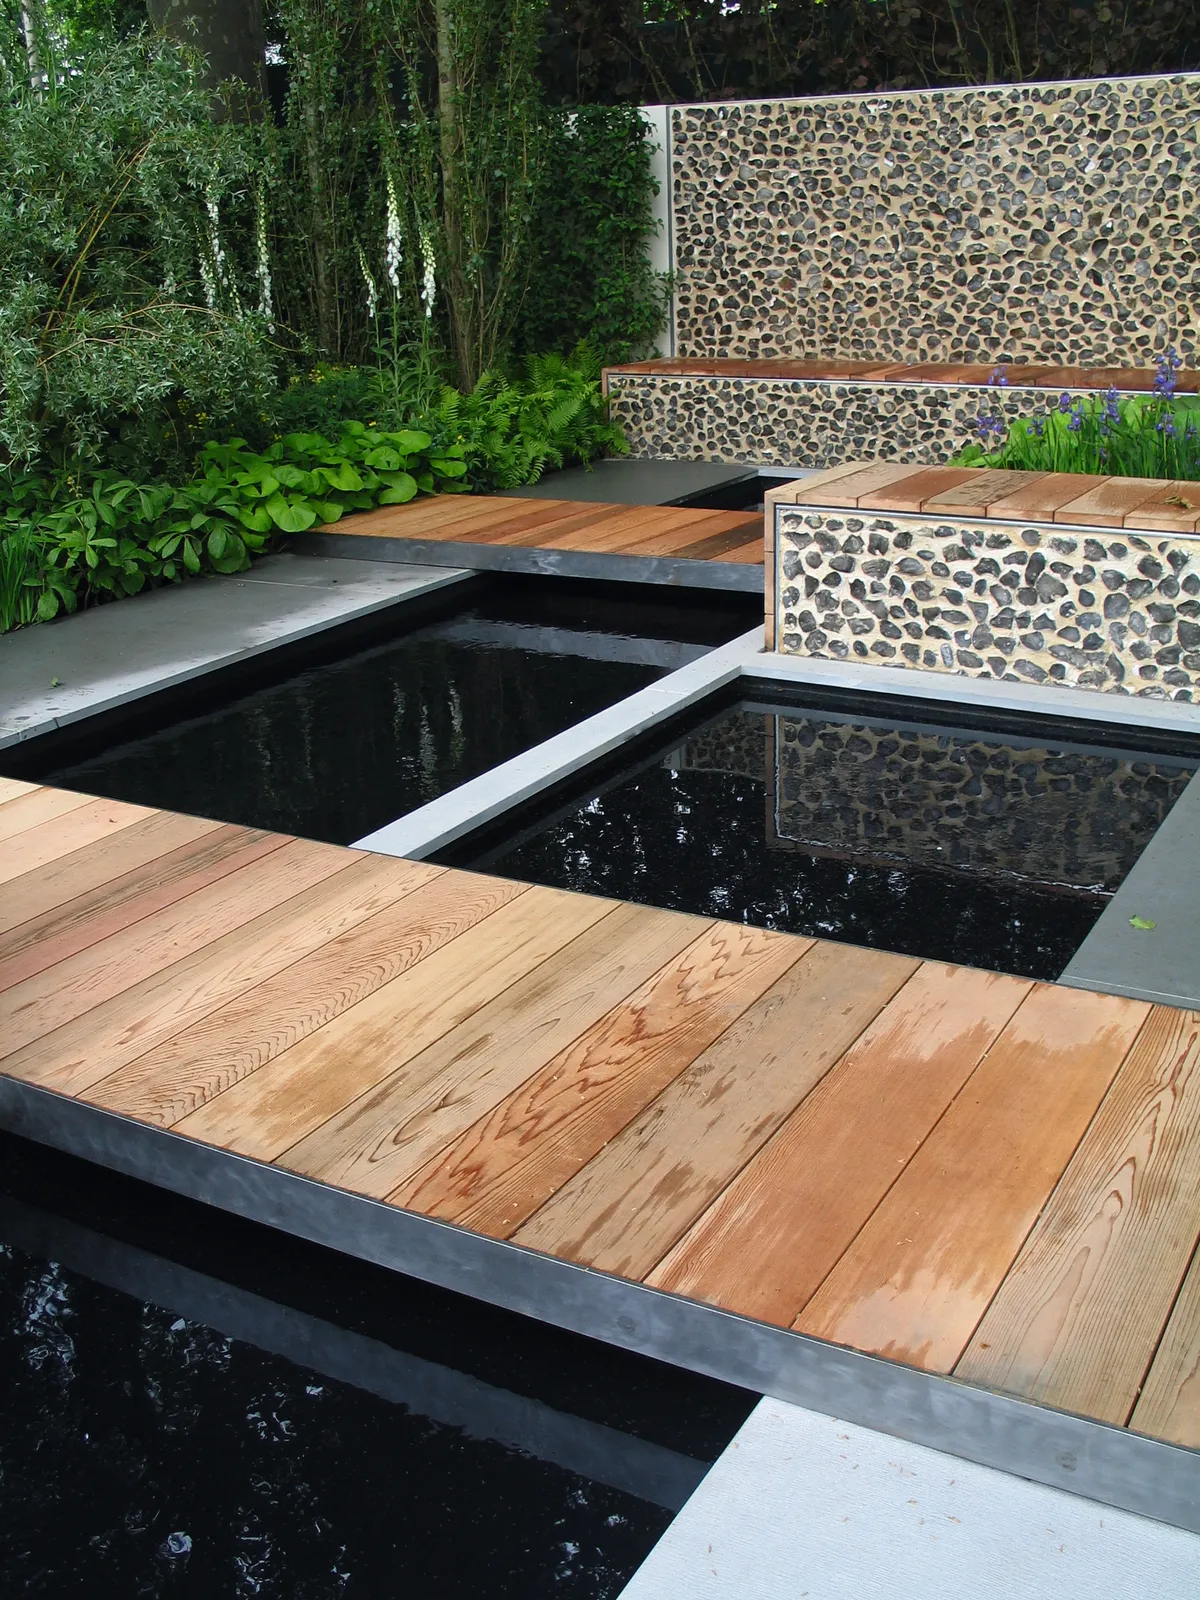 Deck pathways bridge two spaces in a contemporary garden over a mirrored pool